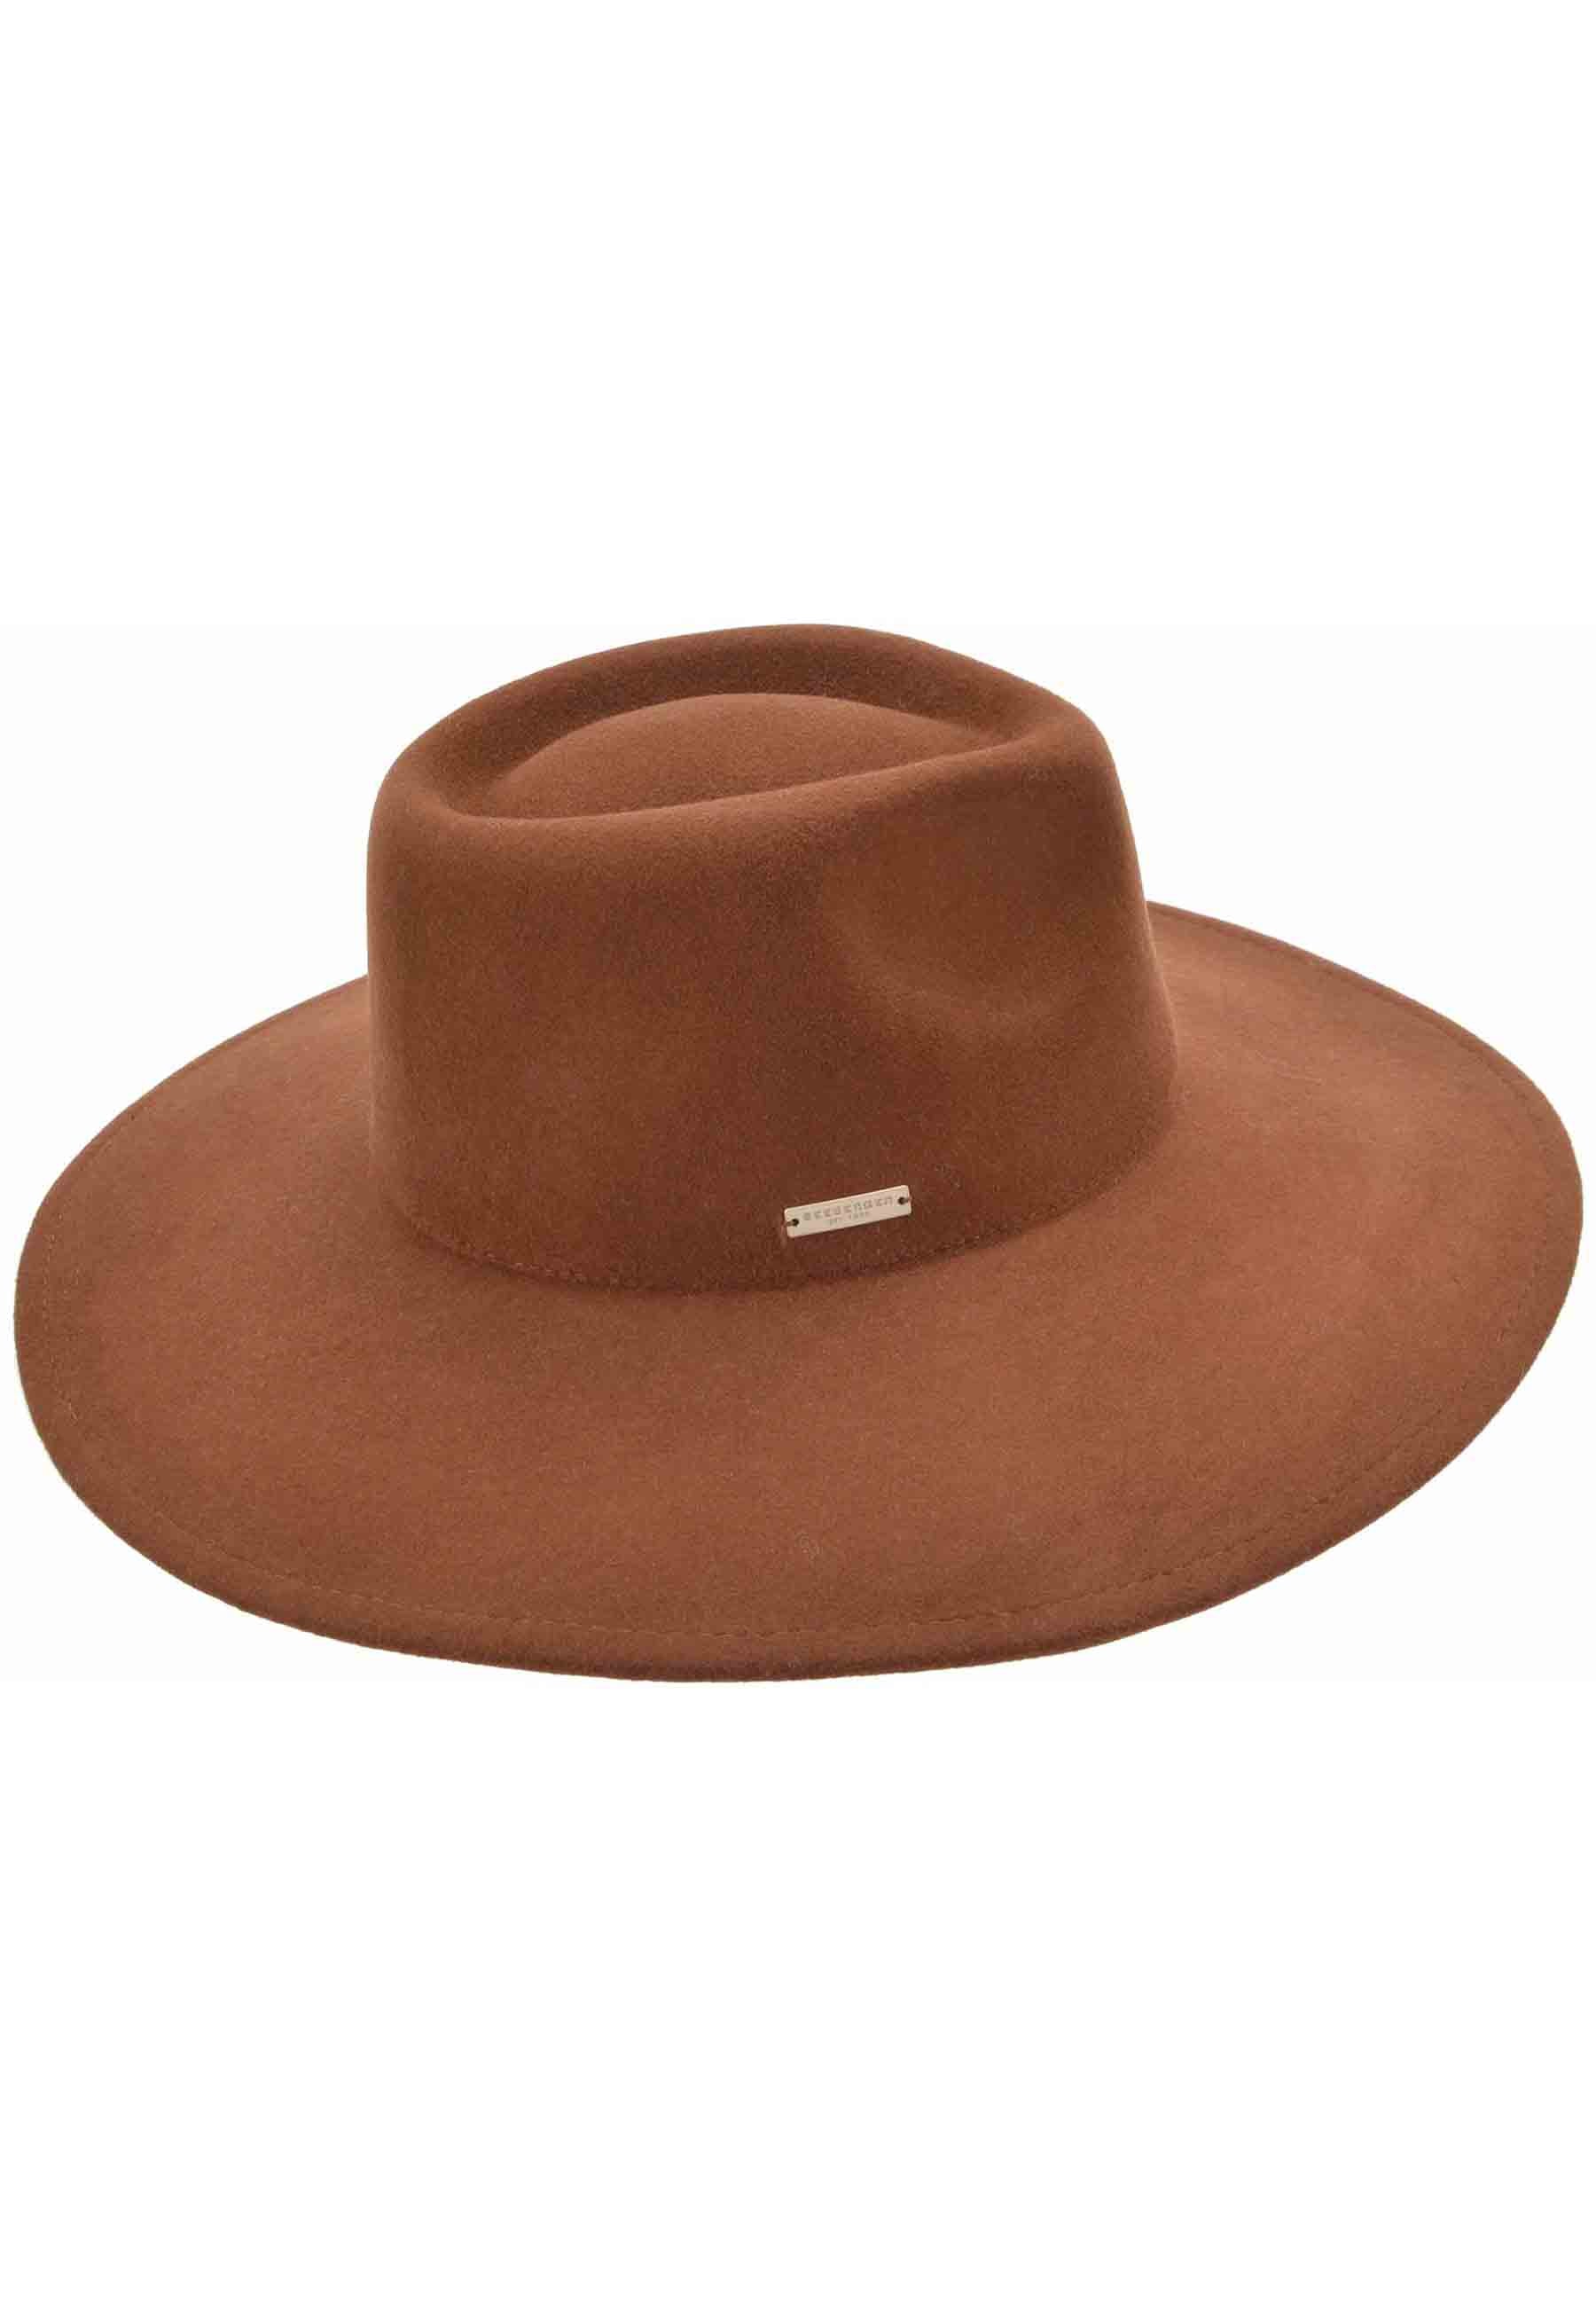 Women's fedora hat in brown wool with wide brim